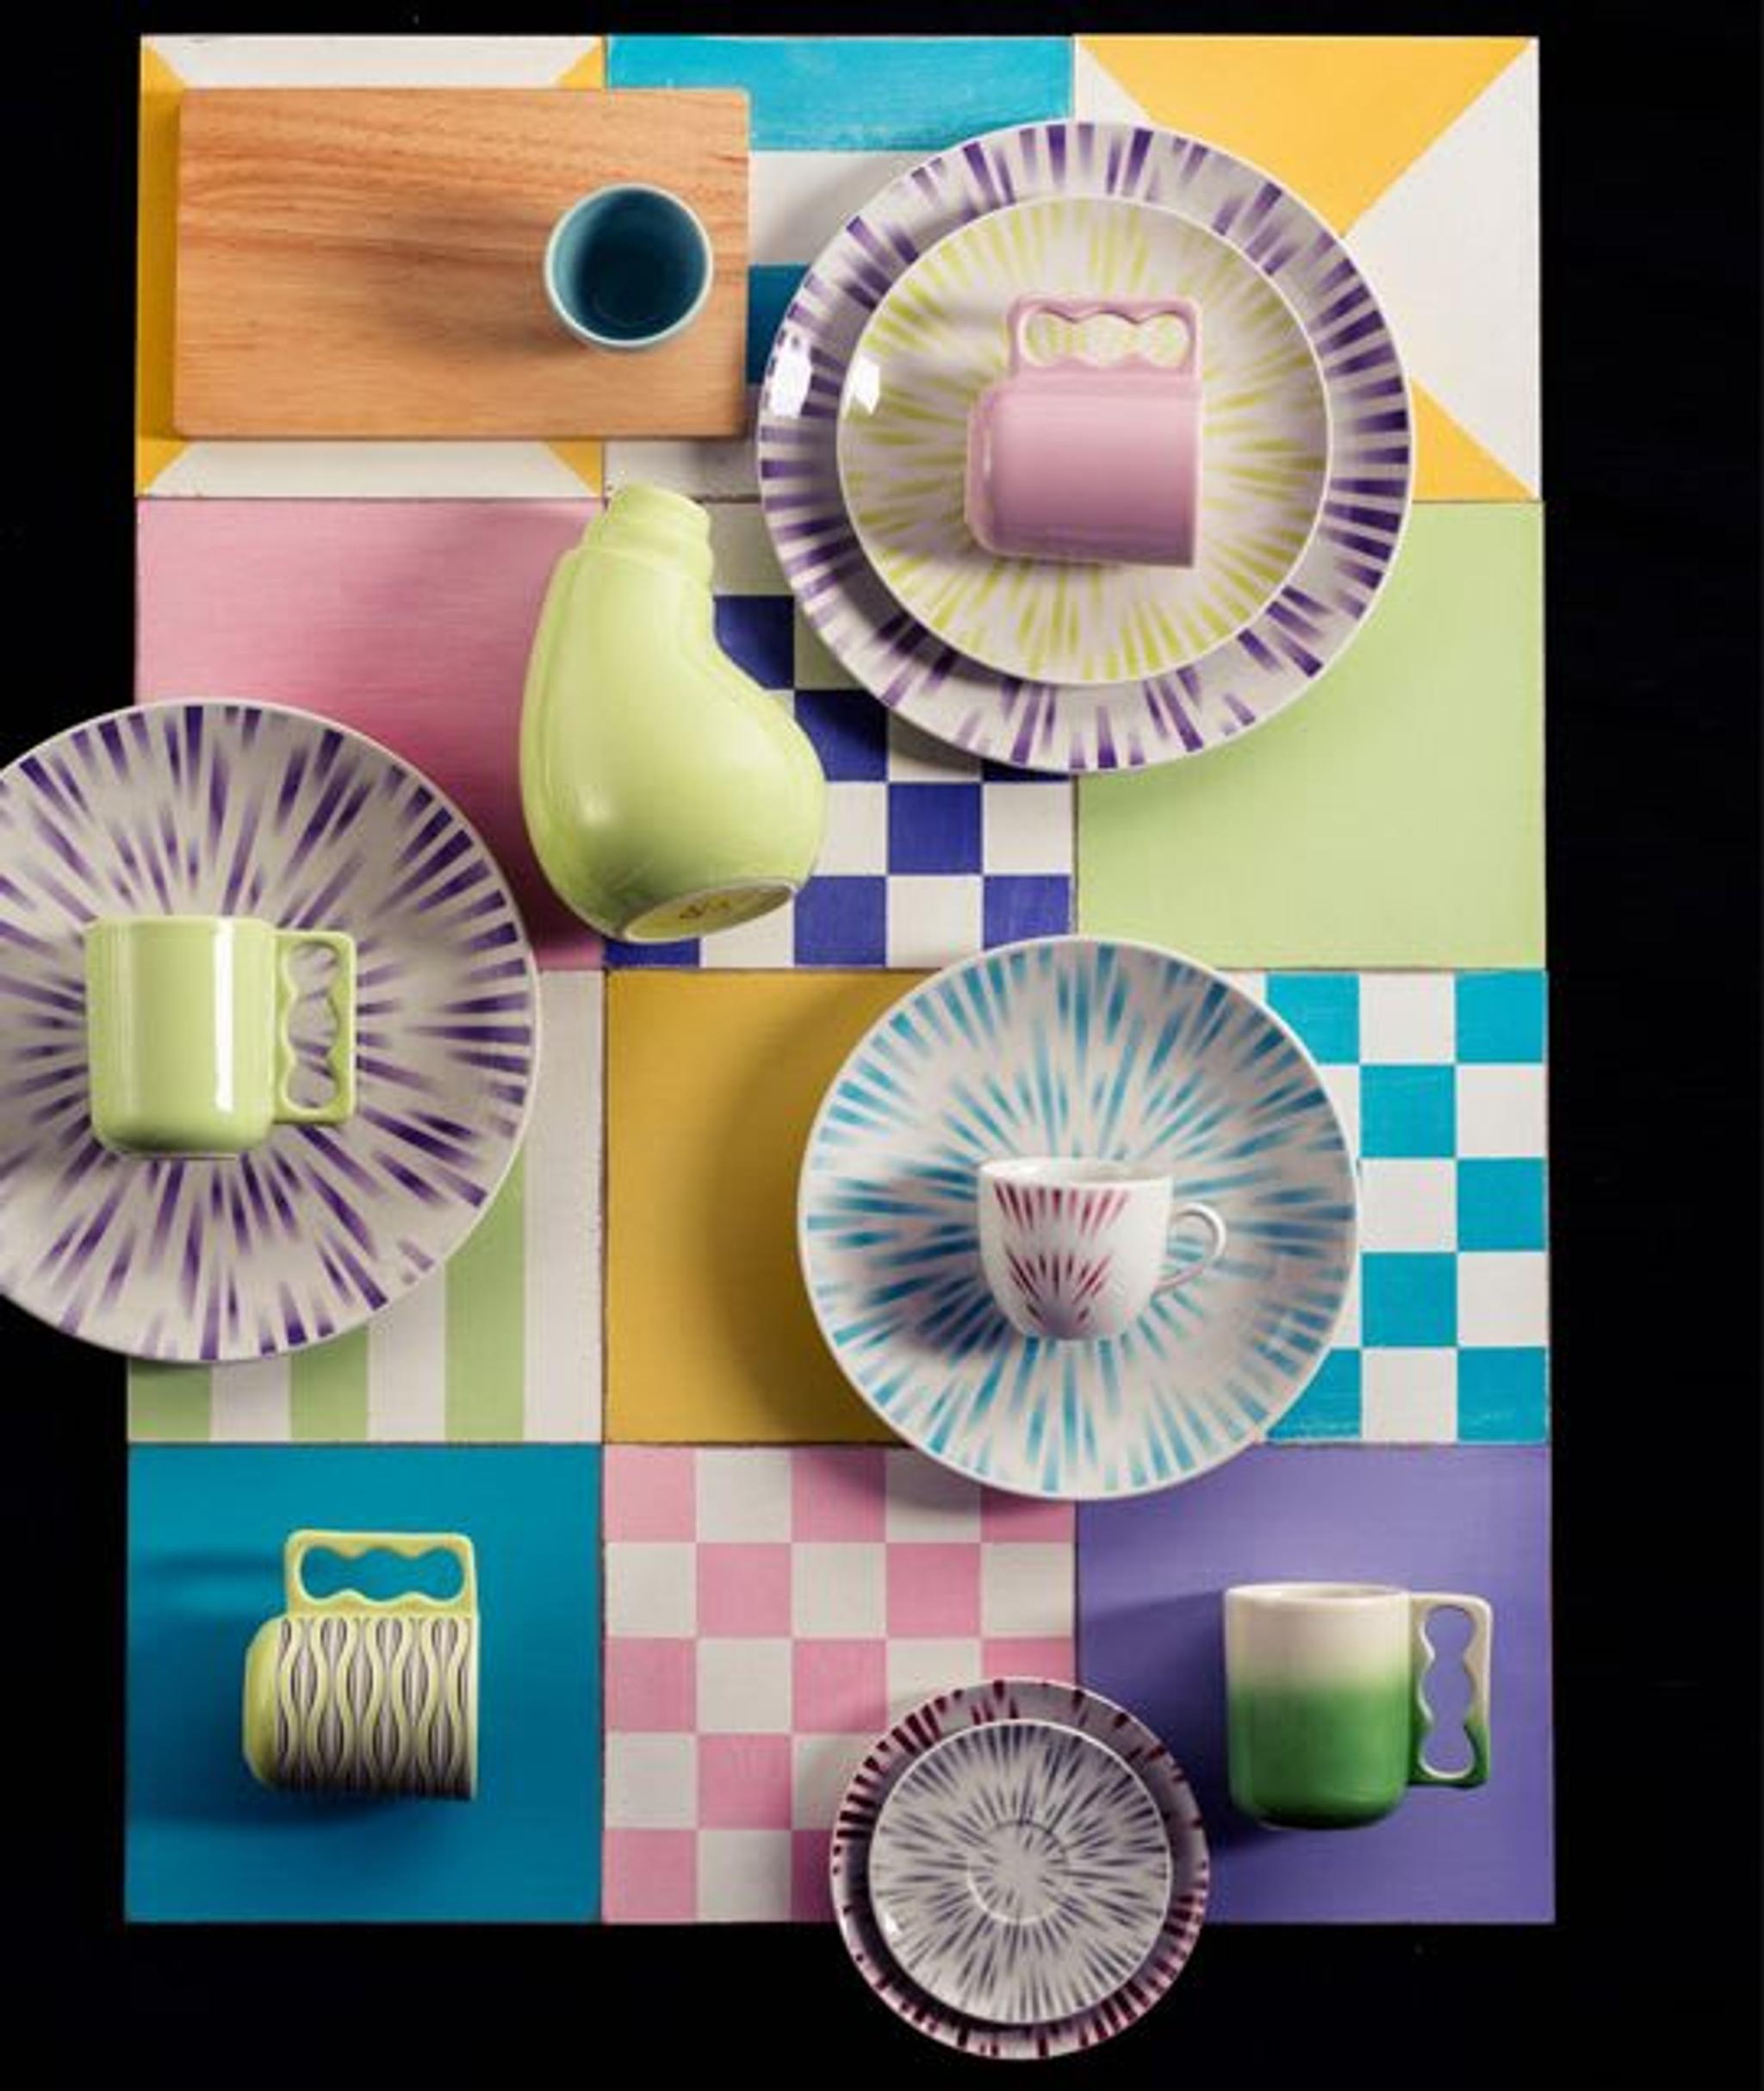 The Coup Dust tabletop collection designed by Karim Rashid in 2013